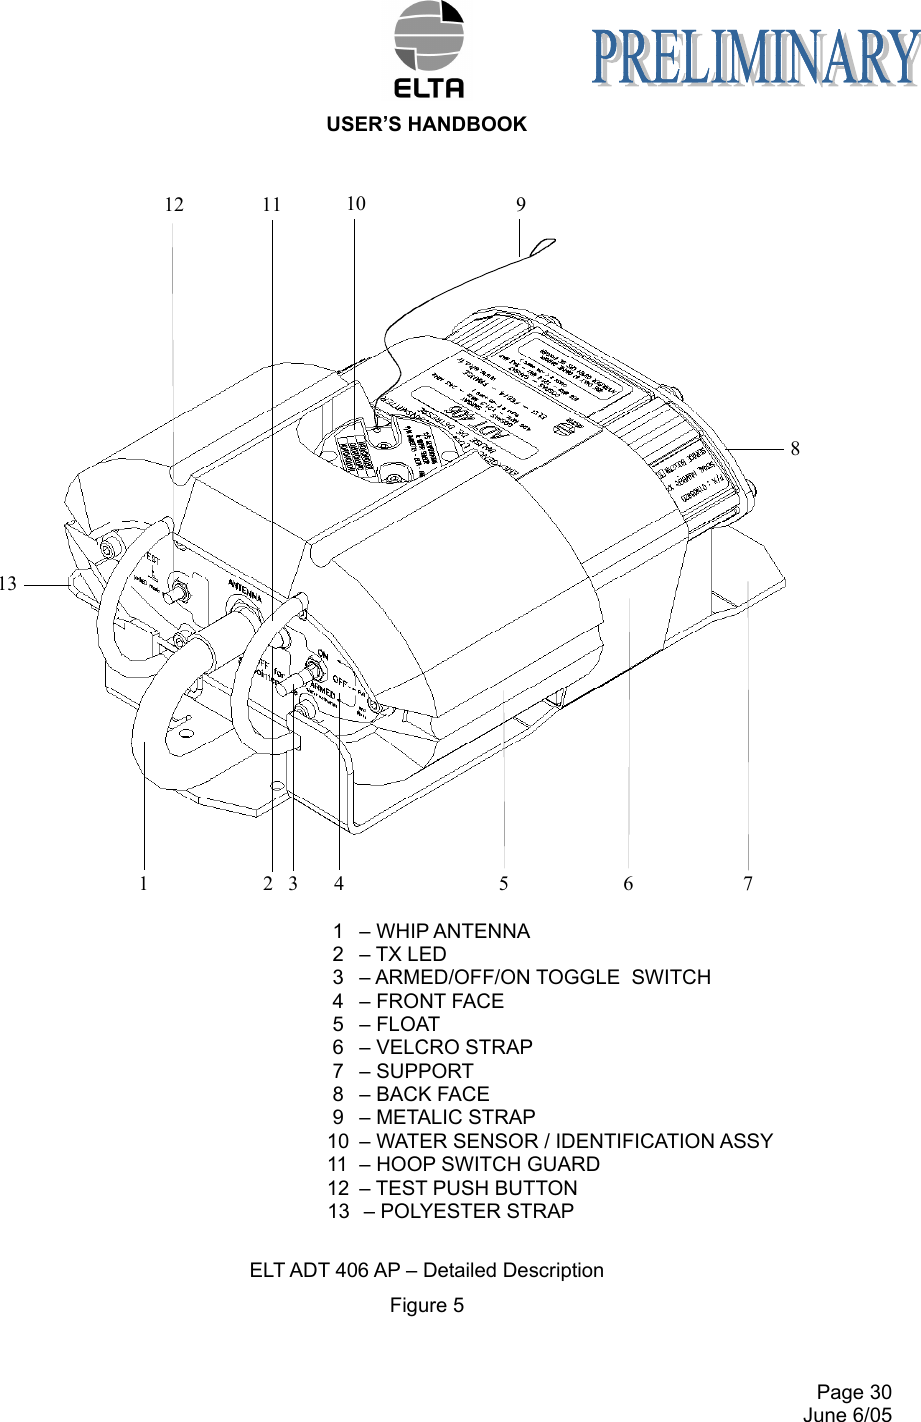  USER’S HANDBOOK     Page 30   June 6/05    1   – WHIP ANTENNA    2   – TX LED   3   – ARMED/OFF/ON TOGGLE  SWITCH   4   – FRONT FACE   5   – FLOAT    6   – VELCRO STRAP   7   – SUPPORT   8   – BACK FACE   9   – METALIC STRAP  10  – WATER SENSOR / IDENTIFICATION ASSY  11  – HOOP SWITCH GUARD  12  – TEST PUSH BUTTON 13  – POLYESTER STRAP  ELT ADT 406 AP – Detailed Description Figure 5  1 432 5 6 78910121311